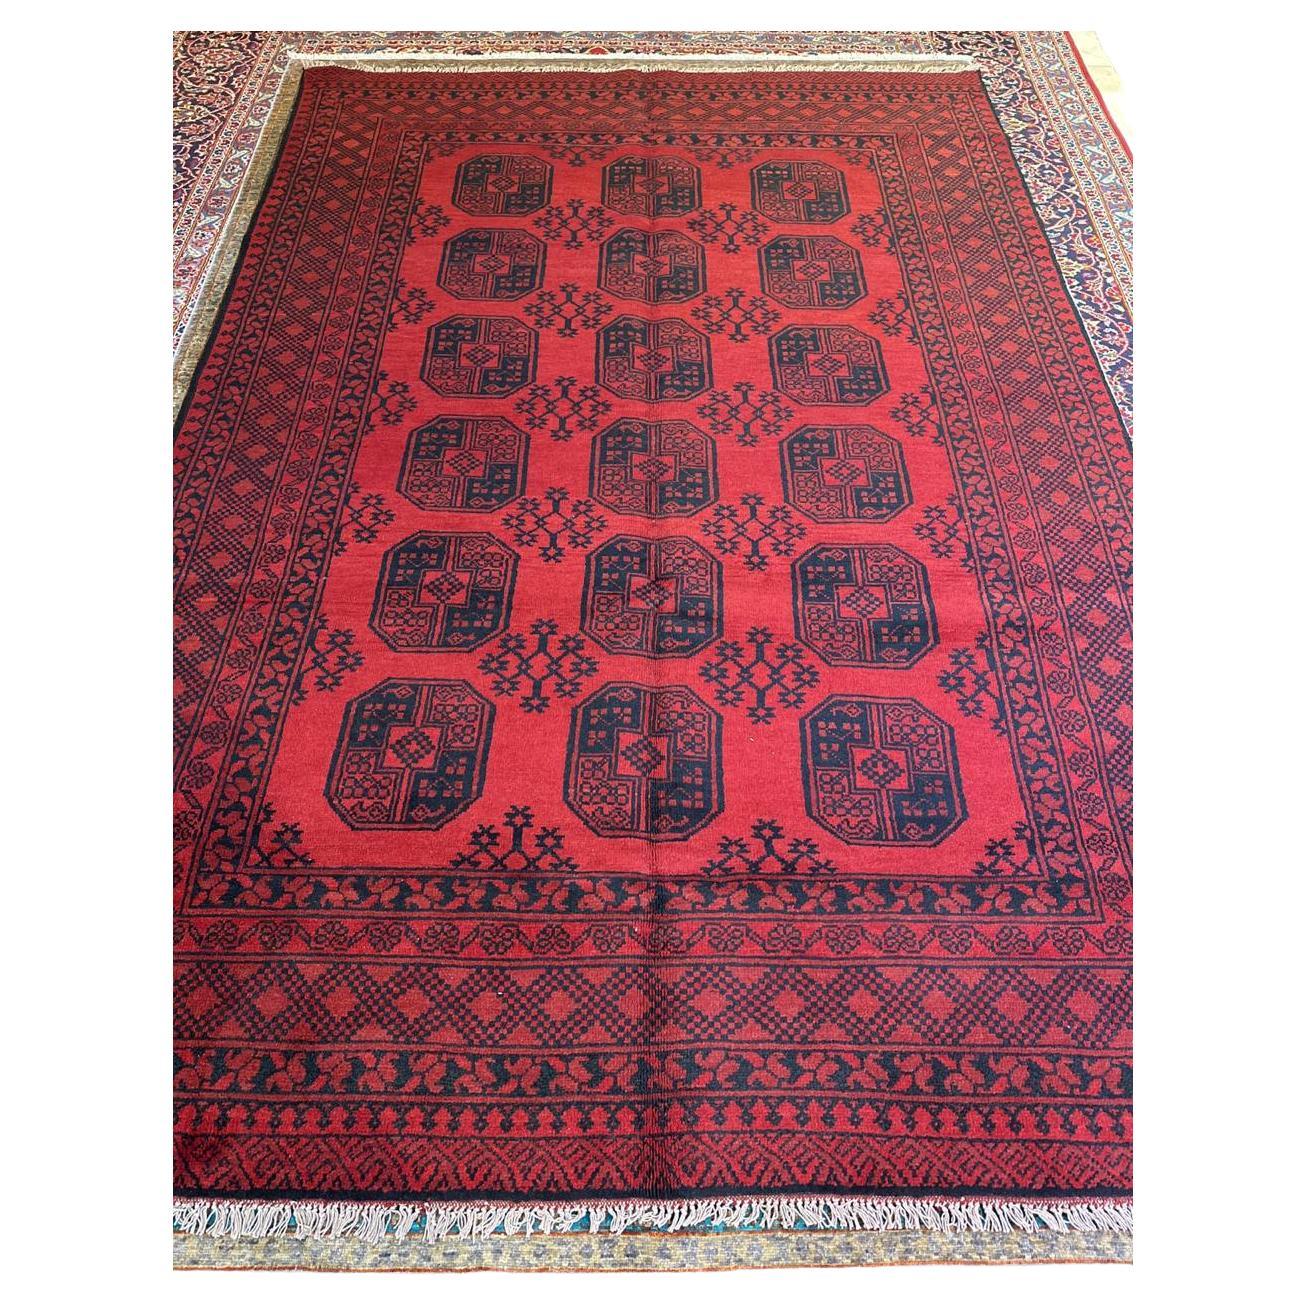 Authentic Handmade Hand Knotted Wool Rug